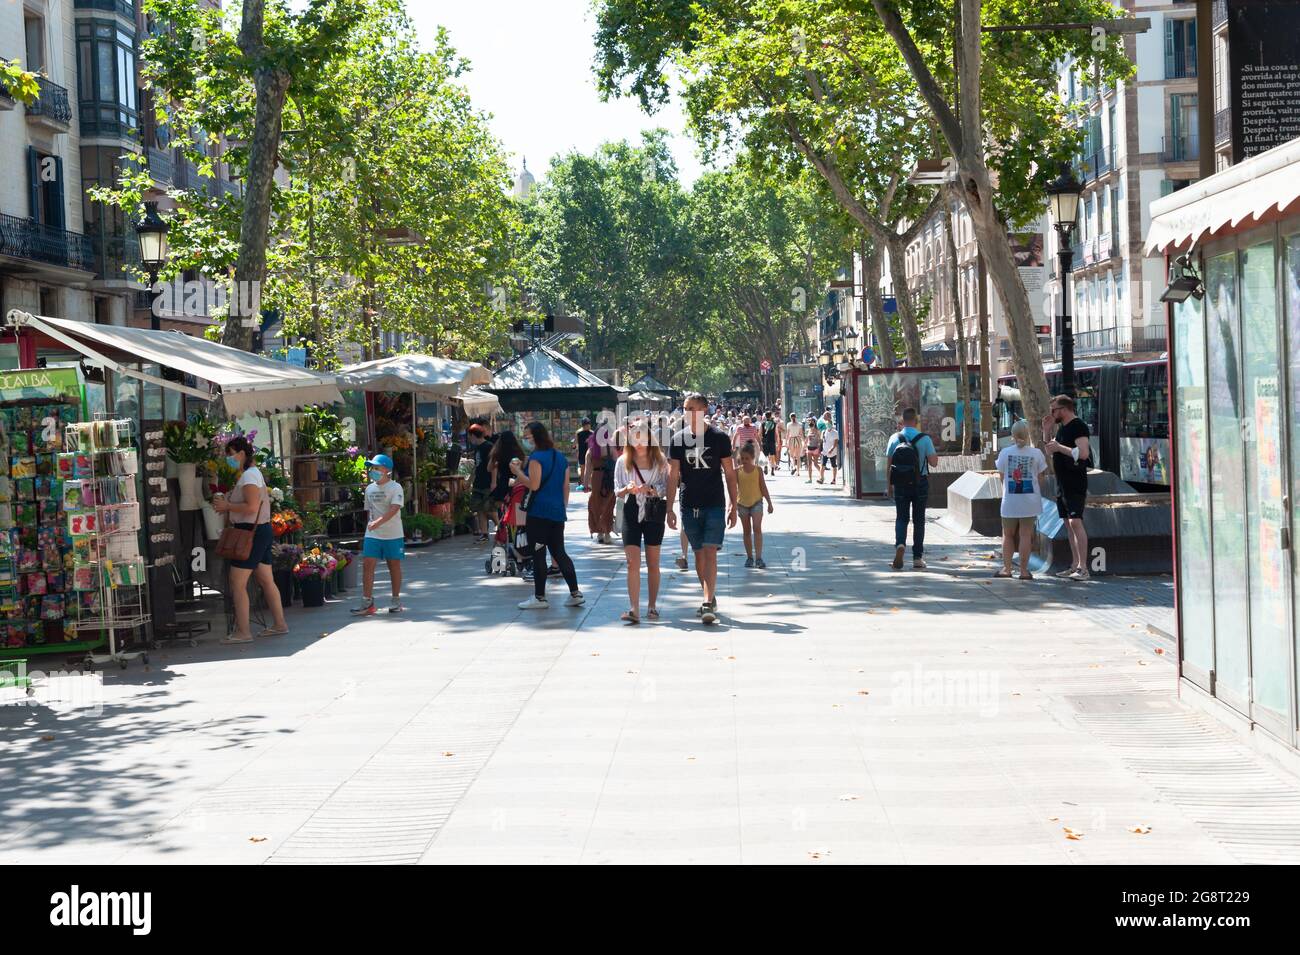 Barcelona, Spain; 19th July 2021: Group of tourists strolling along the Ramblas in Barcelona during the increase in the incidence of COVID-19 cases of Stock Photo